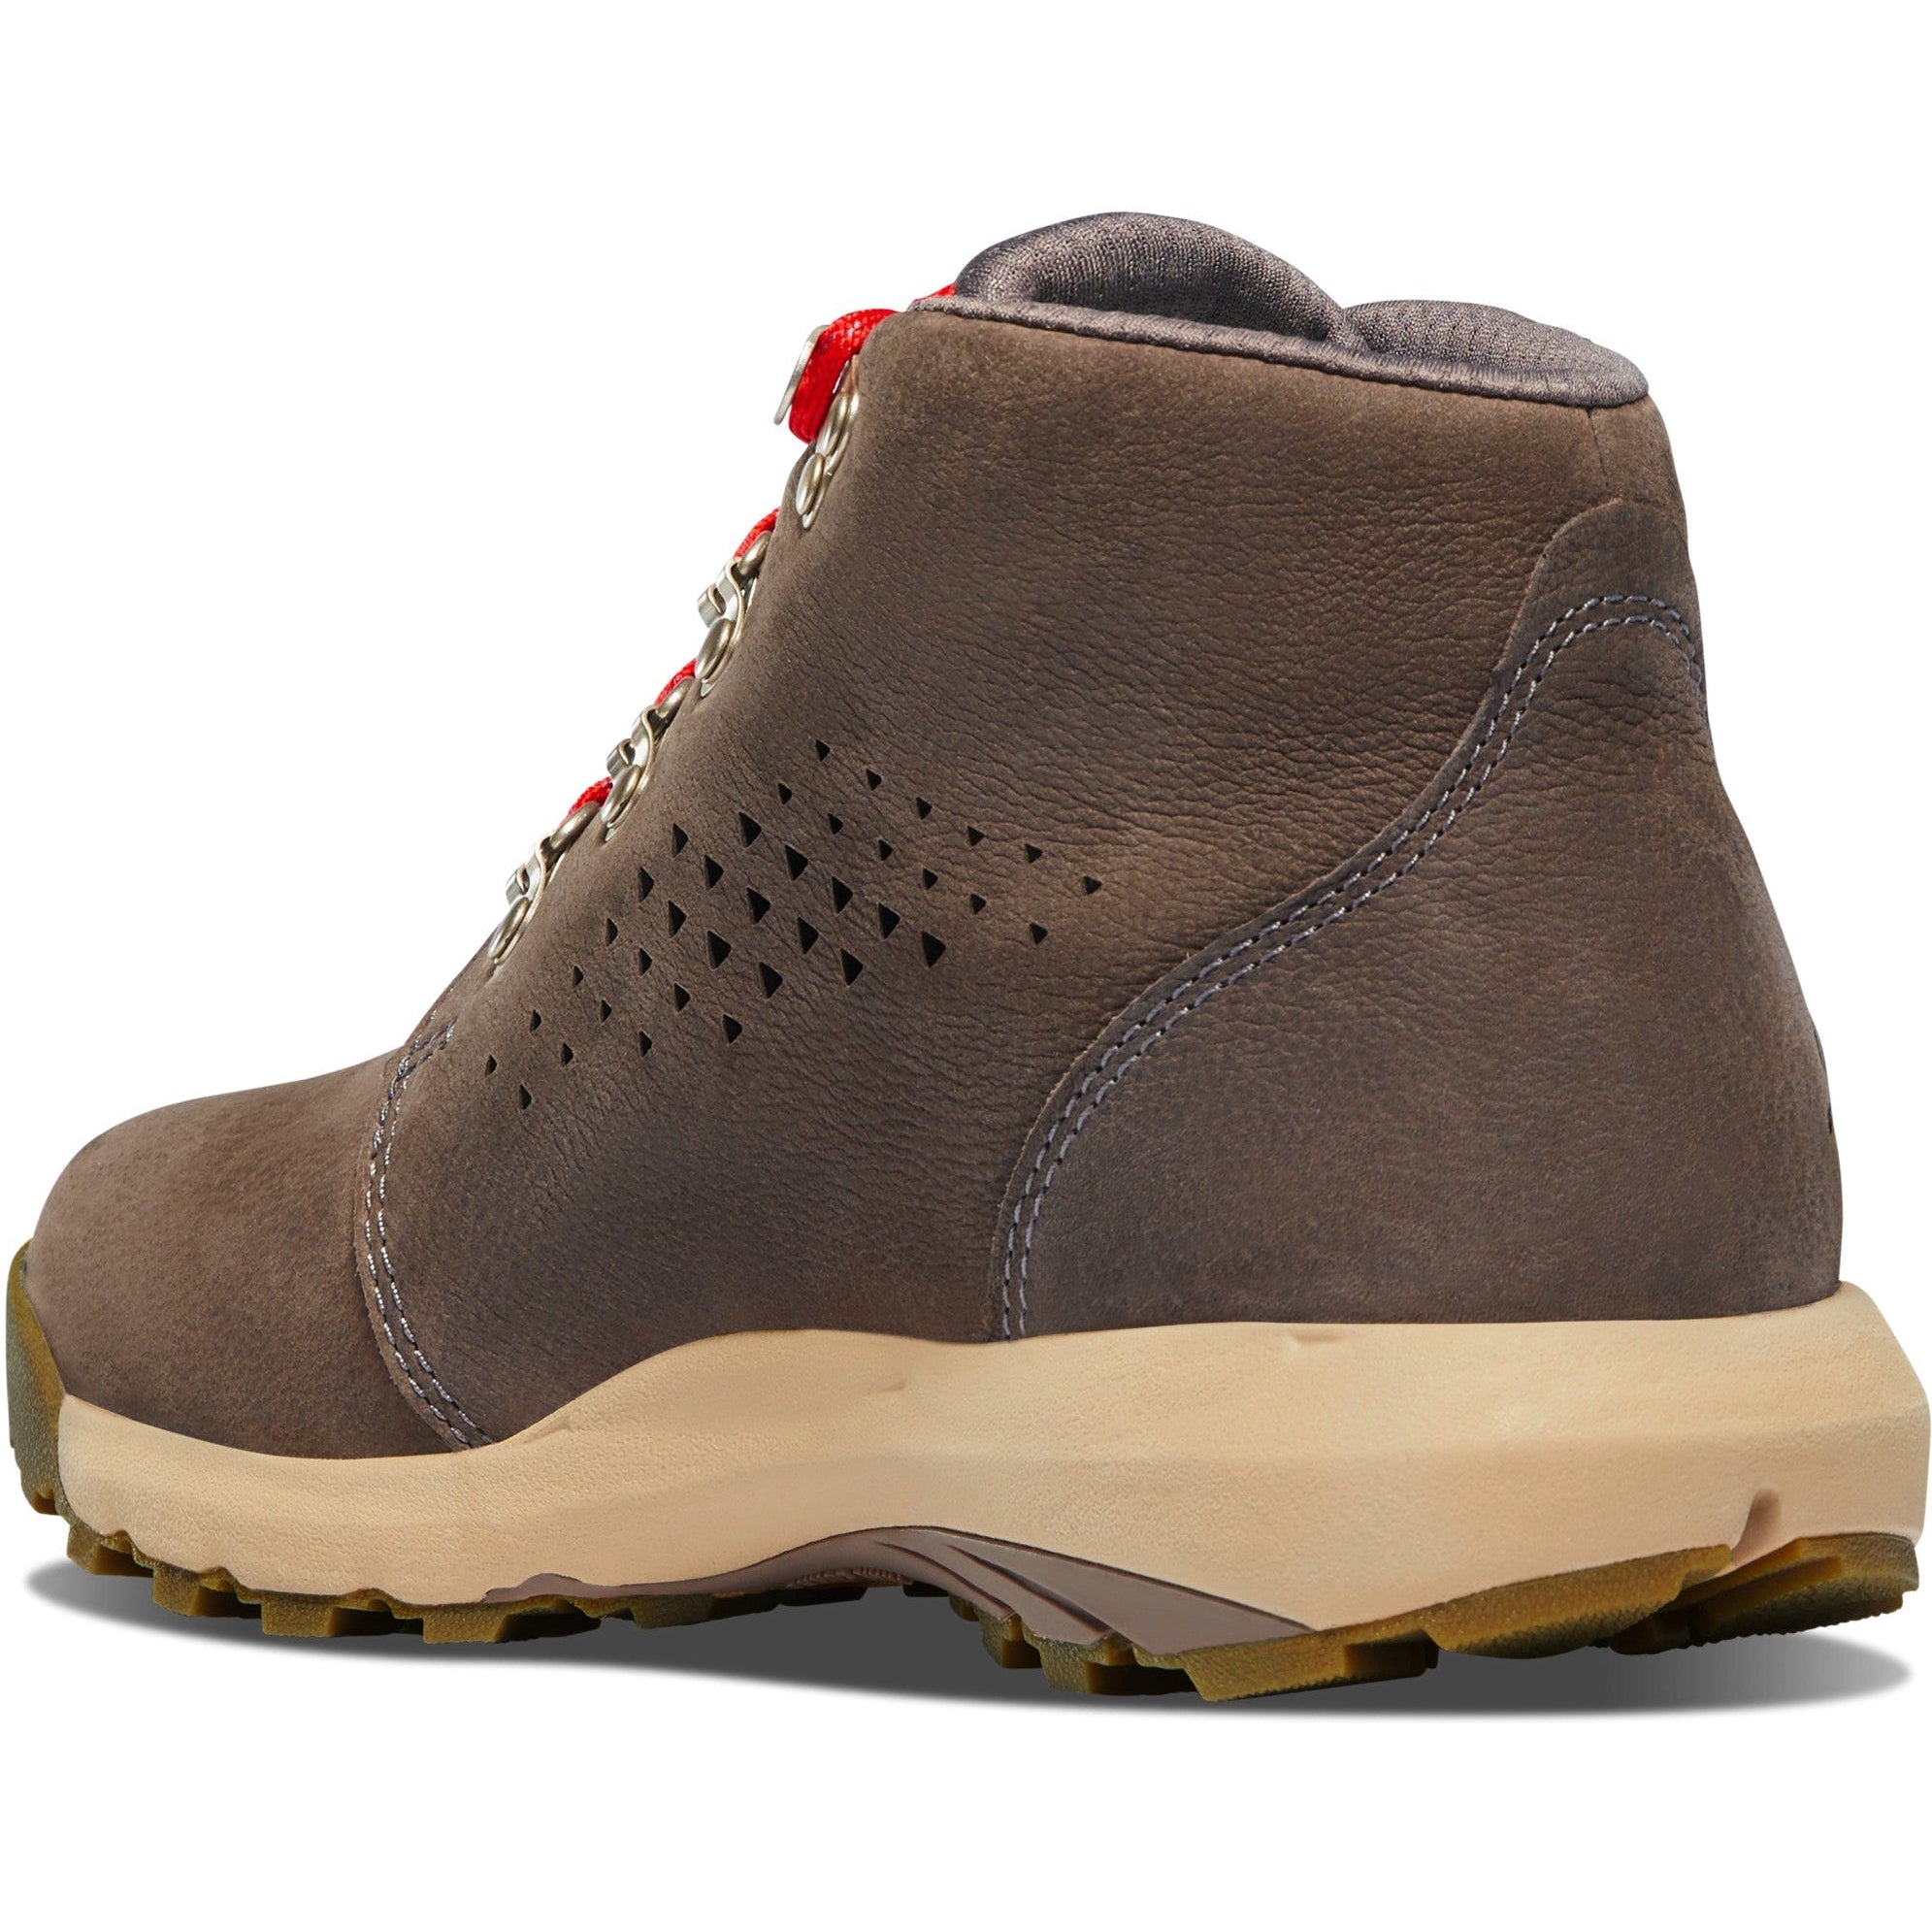 Danner Women's Inquire Chukka 4" WP Hiking Boot - Iron/Picante - 64505  - Overlook Boots